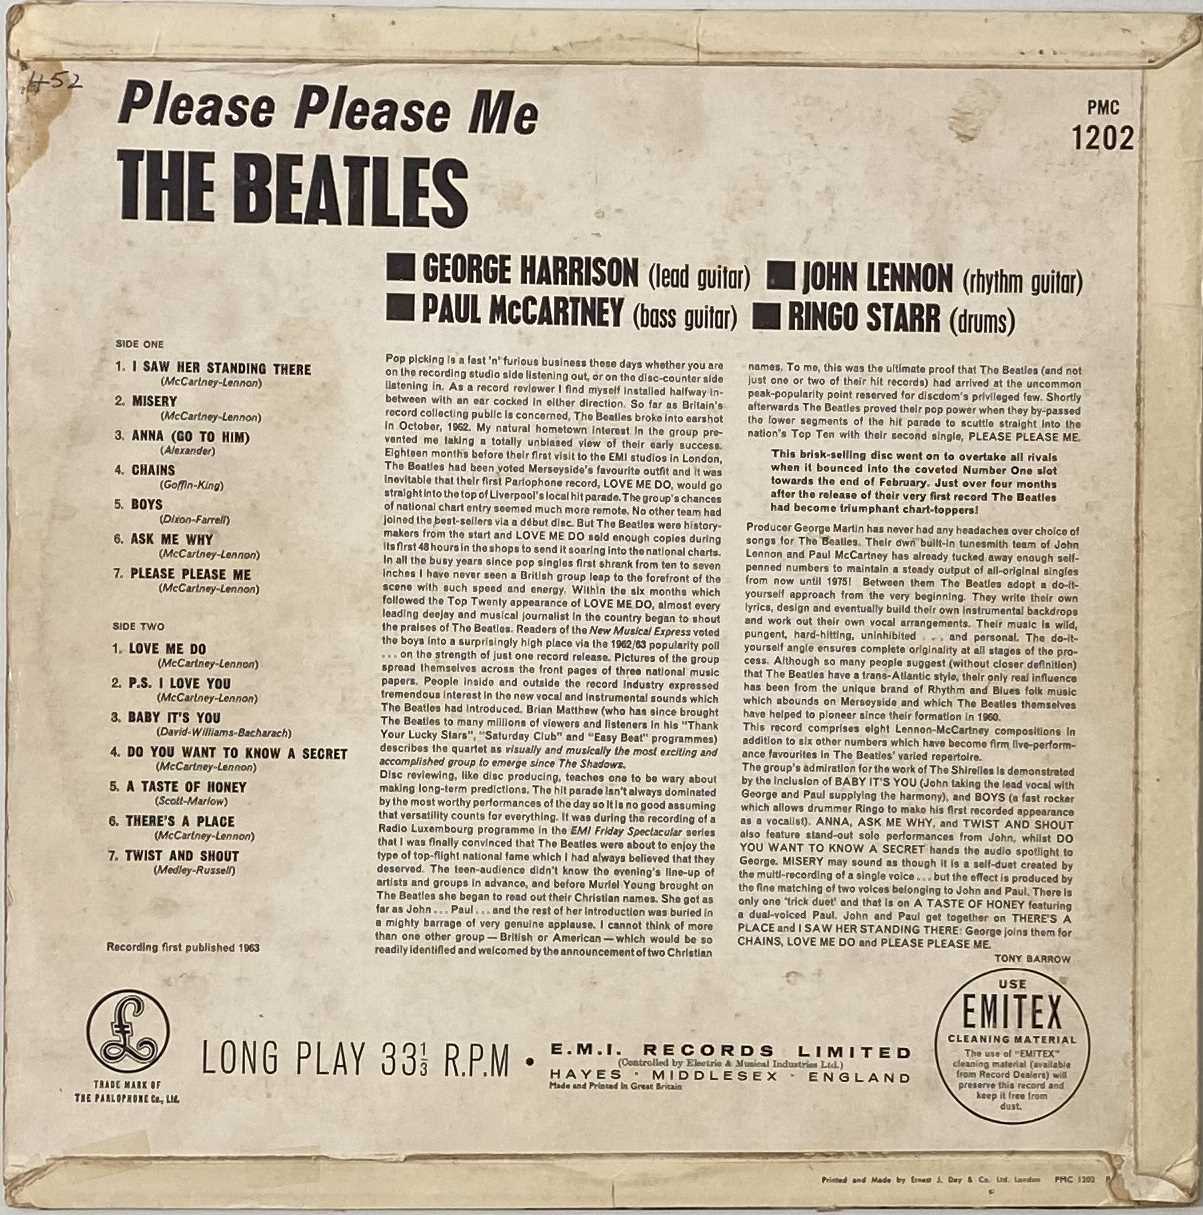 THE BEATLES - PLEASE PLEASE ME LP (ORIGINAL UK MONO 'BLACK AND GOLD' PRESSING - PMC 1202). - Image 3 of 5